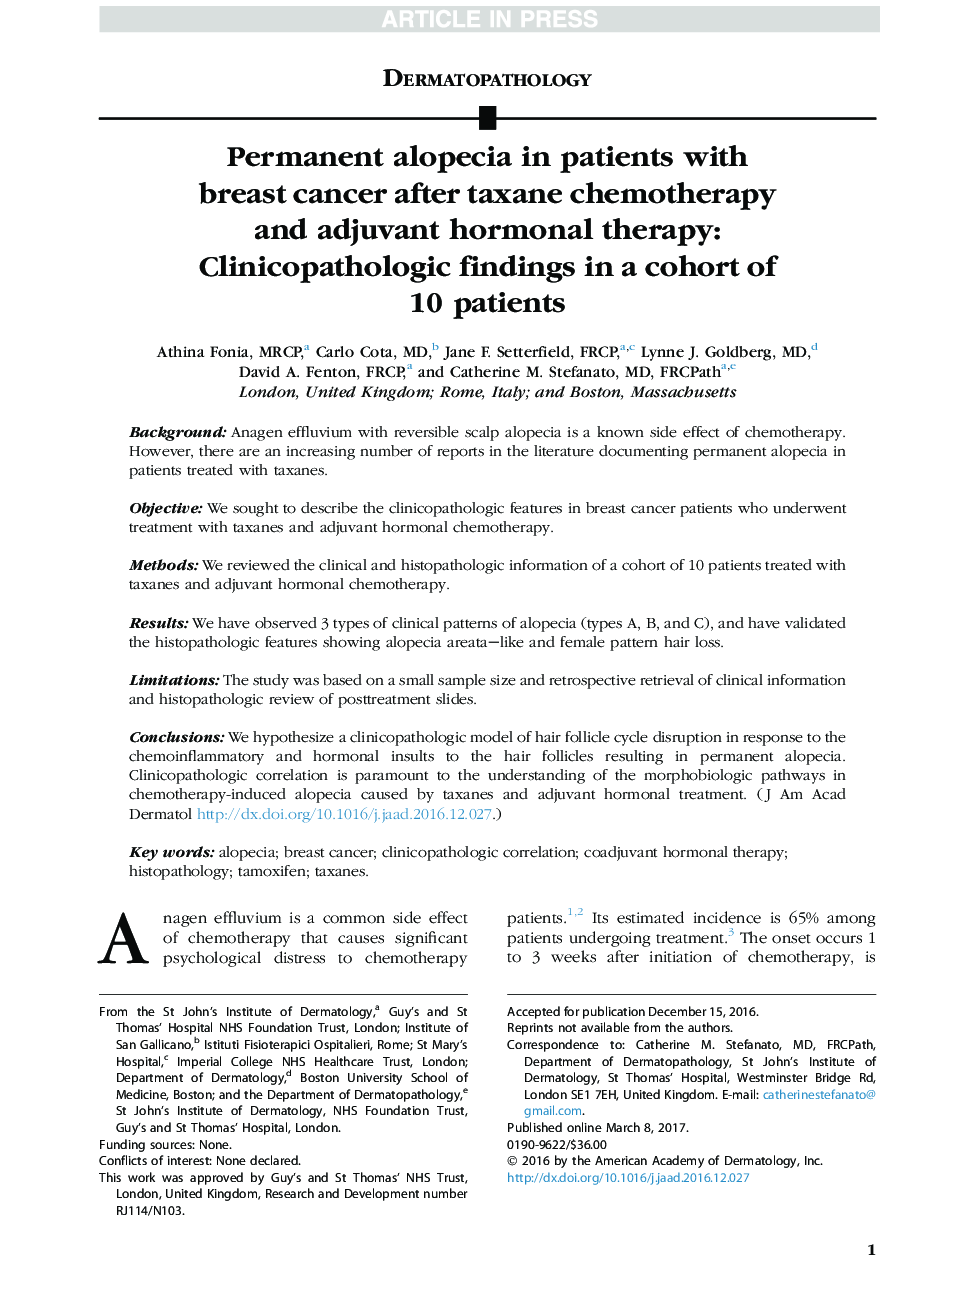 Permanent alopecia in patients with breast cancer after taxane chemotherapy and adjuvant hormonal therapy: Clinicopathologic findings in a cohort of 10 patients